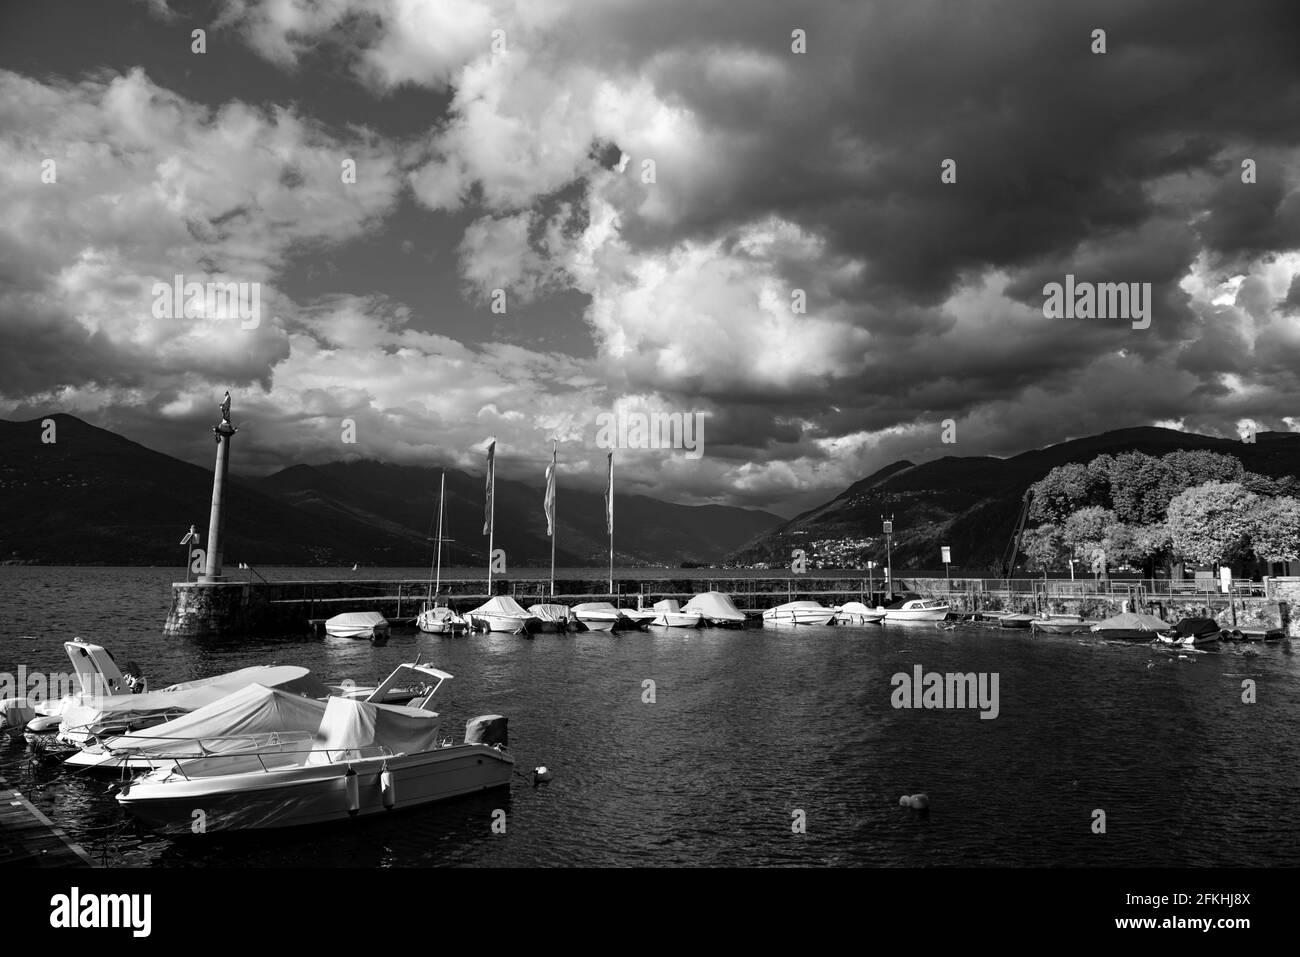 small port of Luino, infrared landscape aftere the summer storm Stock Photo